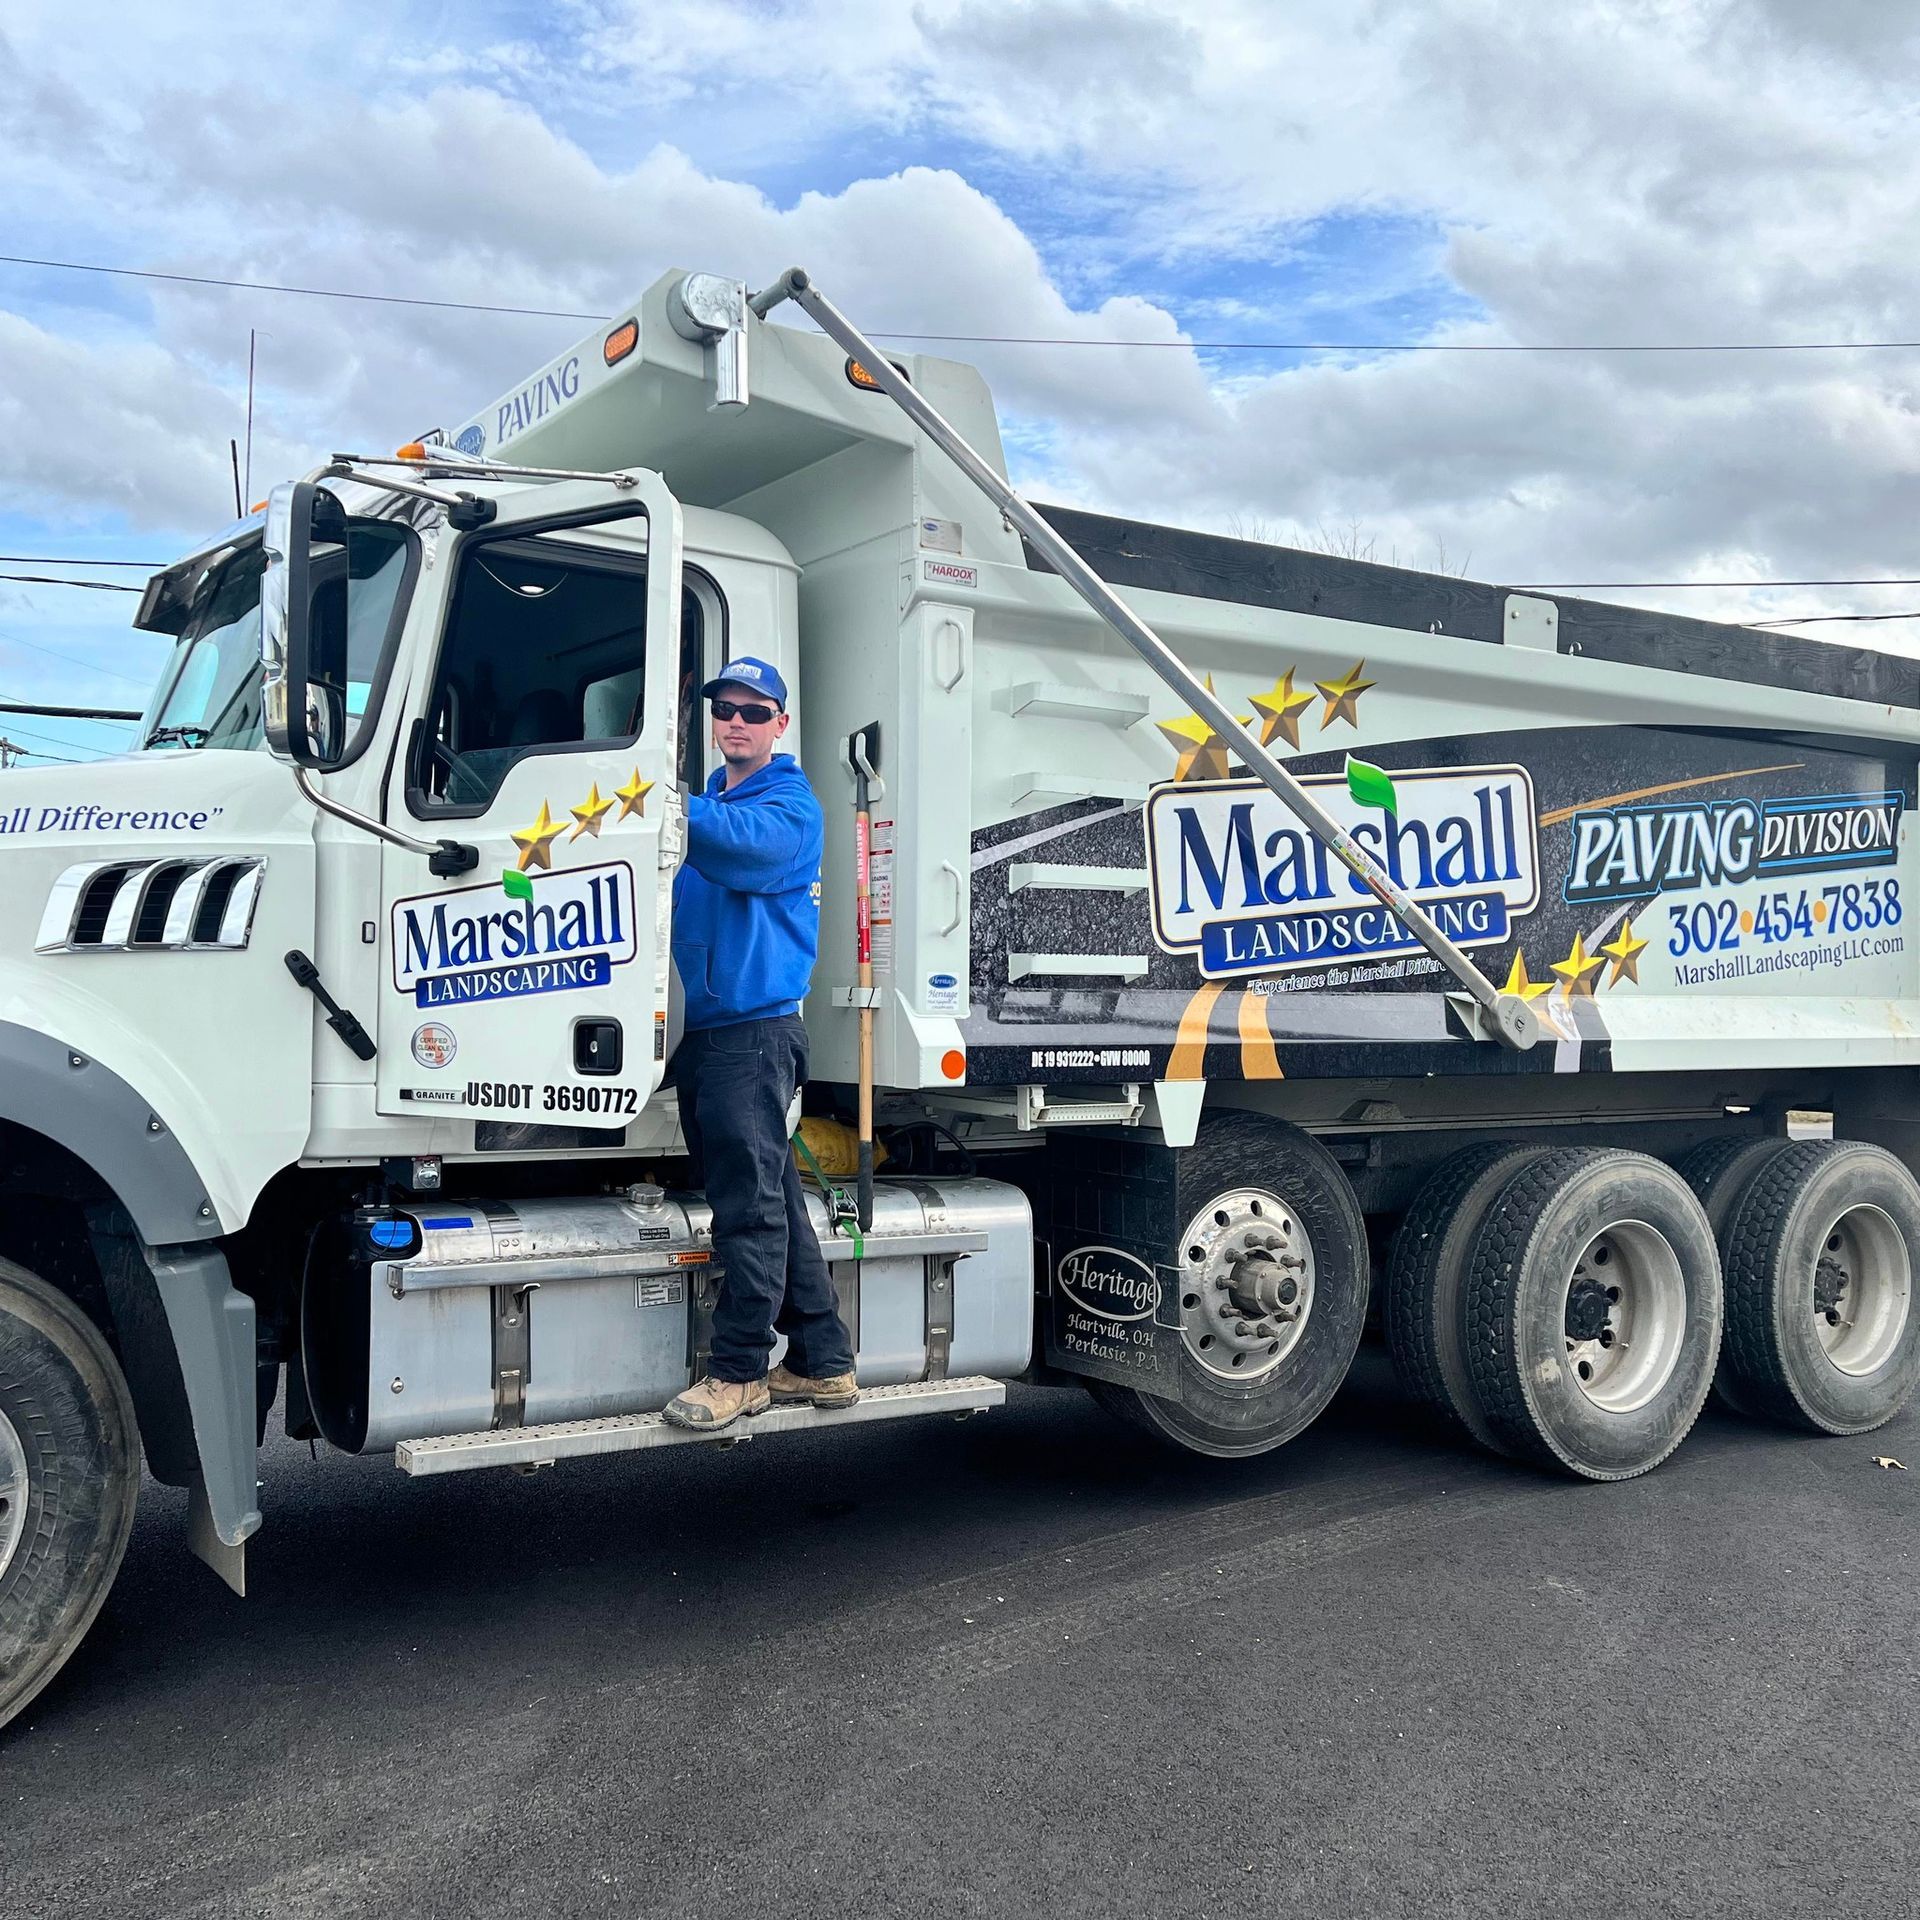 Marshall Landscaping Owner Shawn Marshall climbing proudly into branded heavy truck.